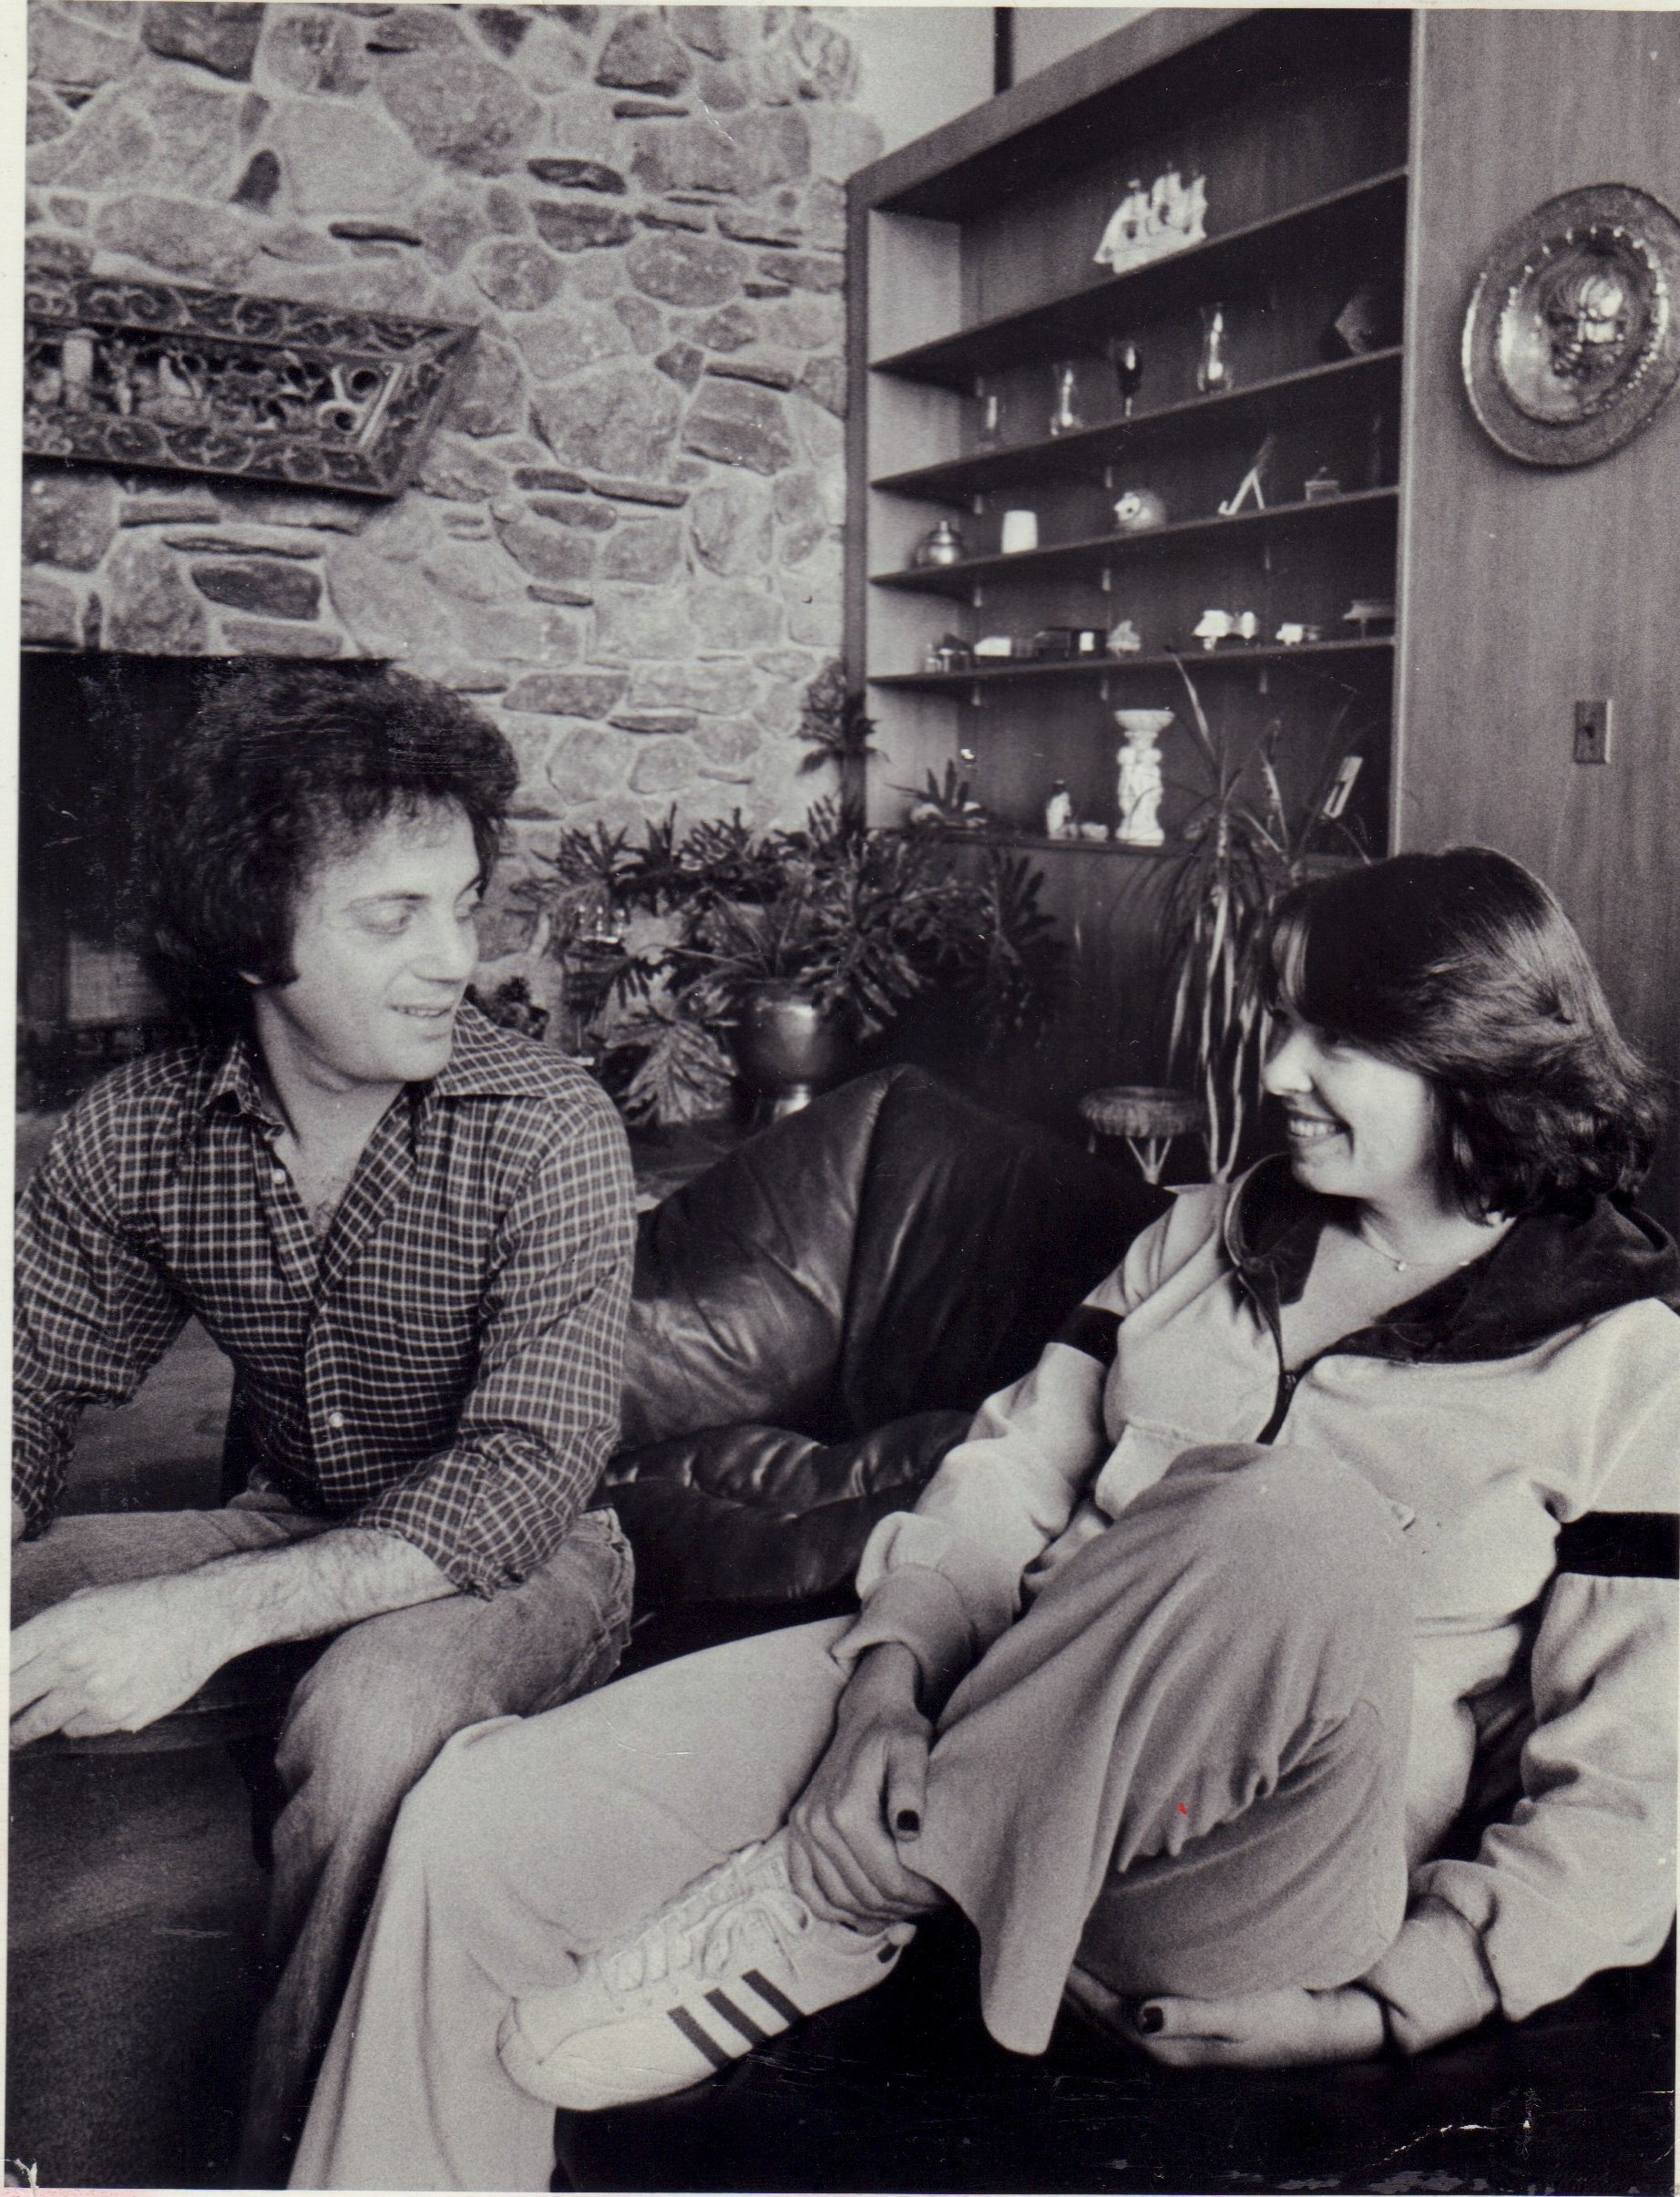 Billy Joel and his wife Elizabeth Weber photographed at their home in Cove Neck on December 20, 1978. / Source: Getty Images